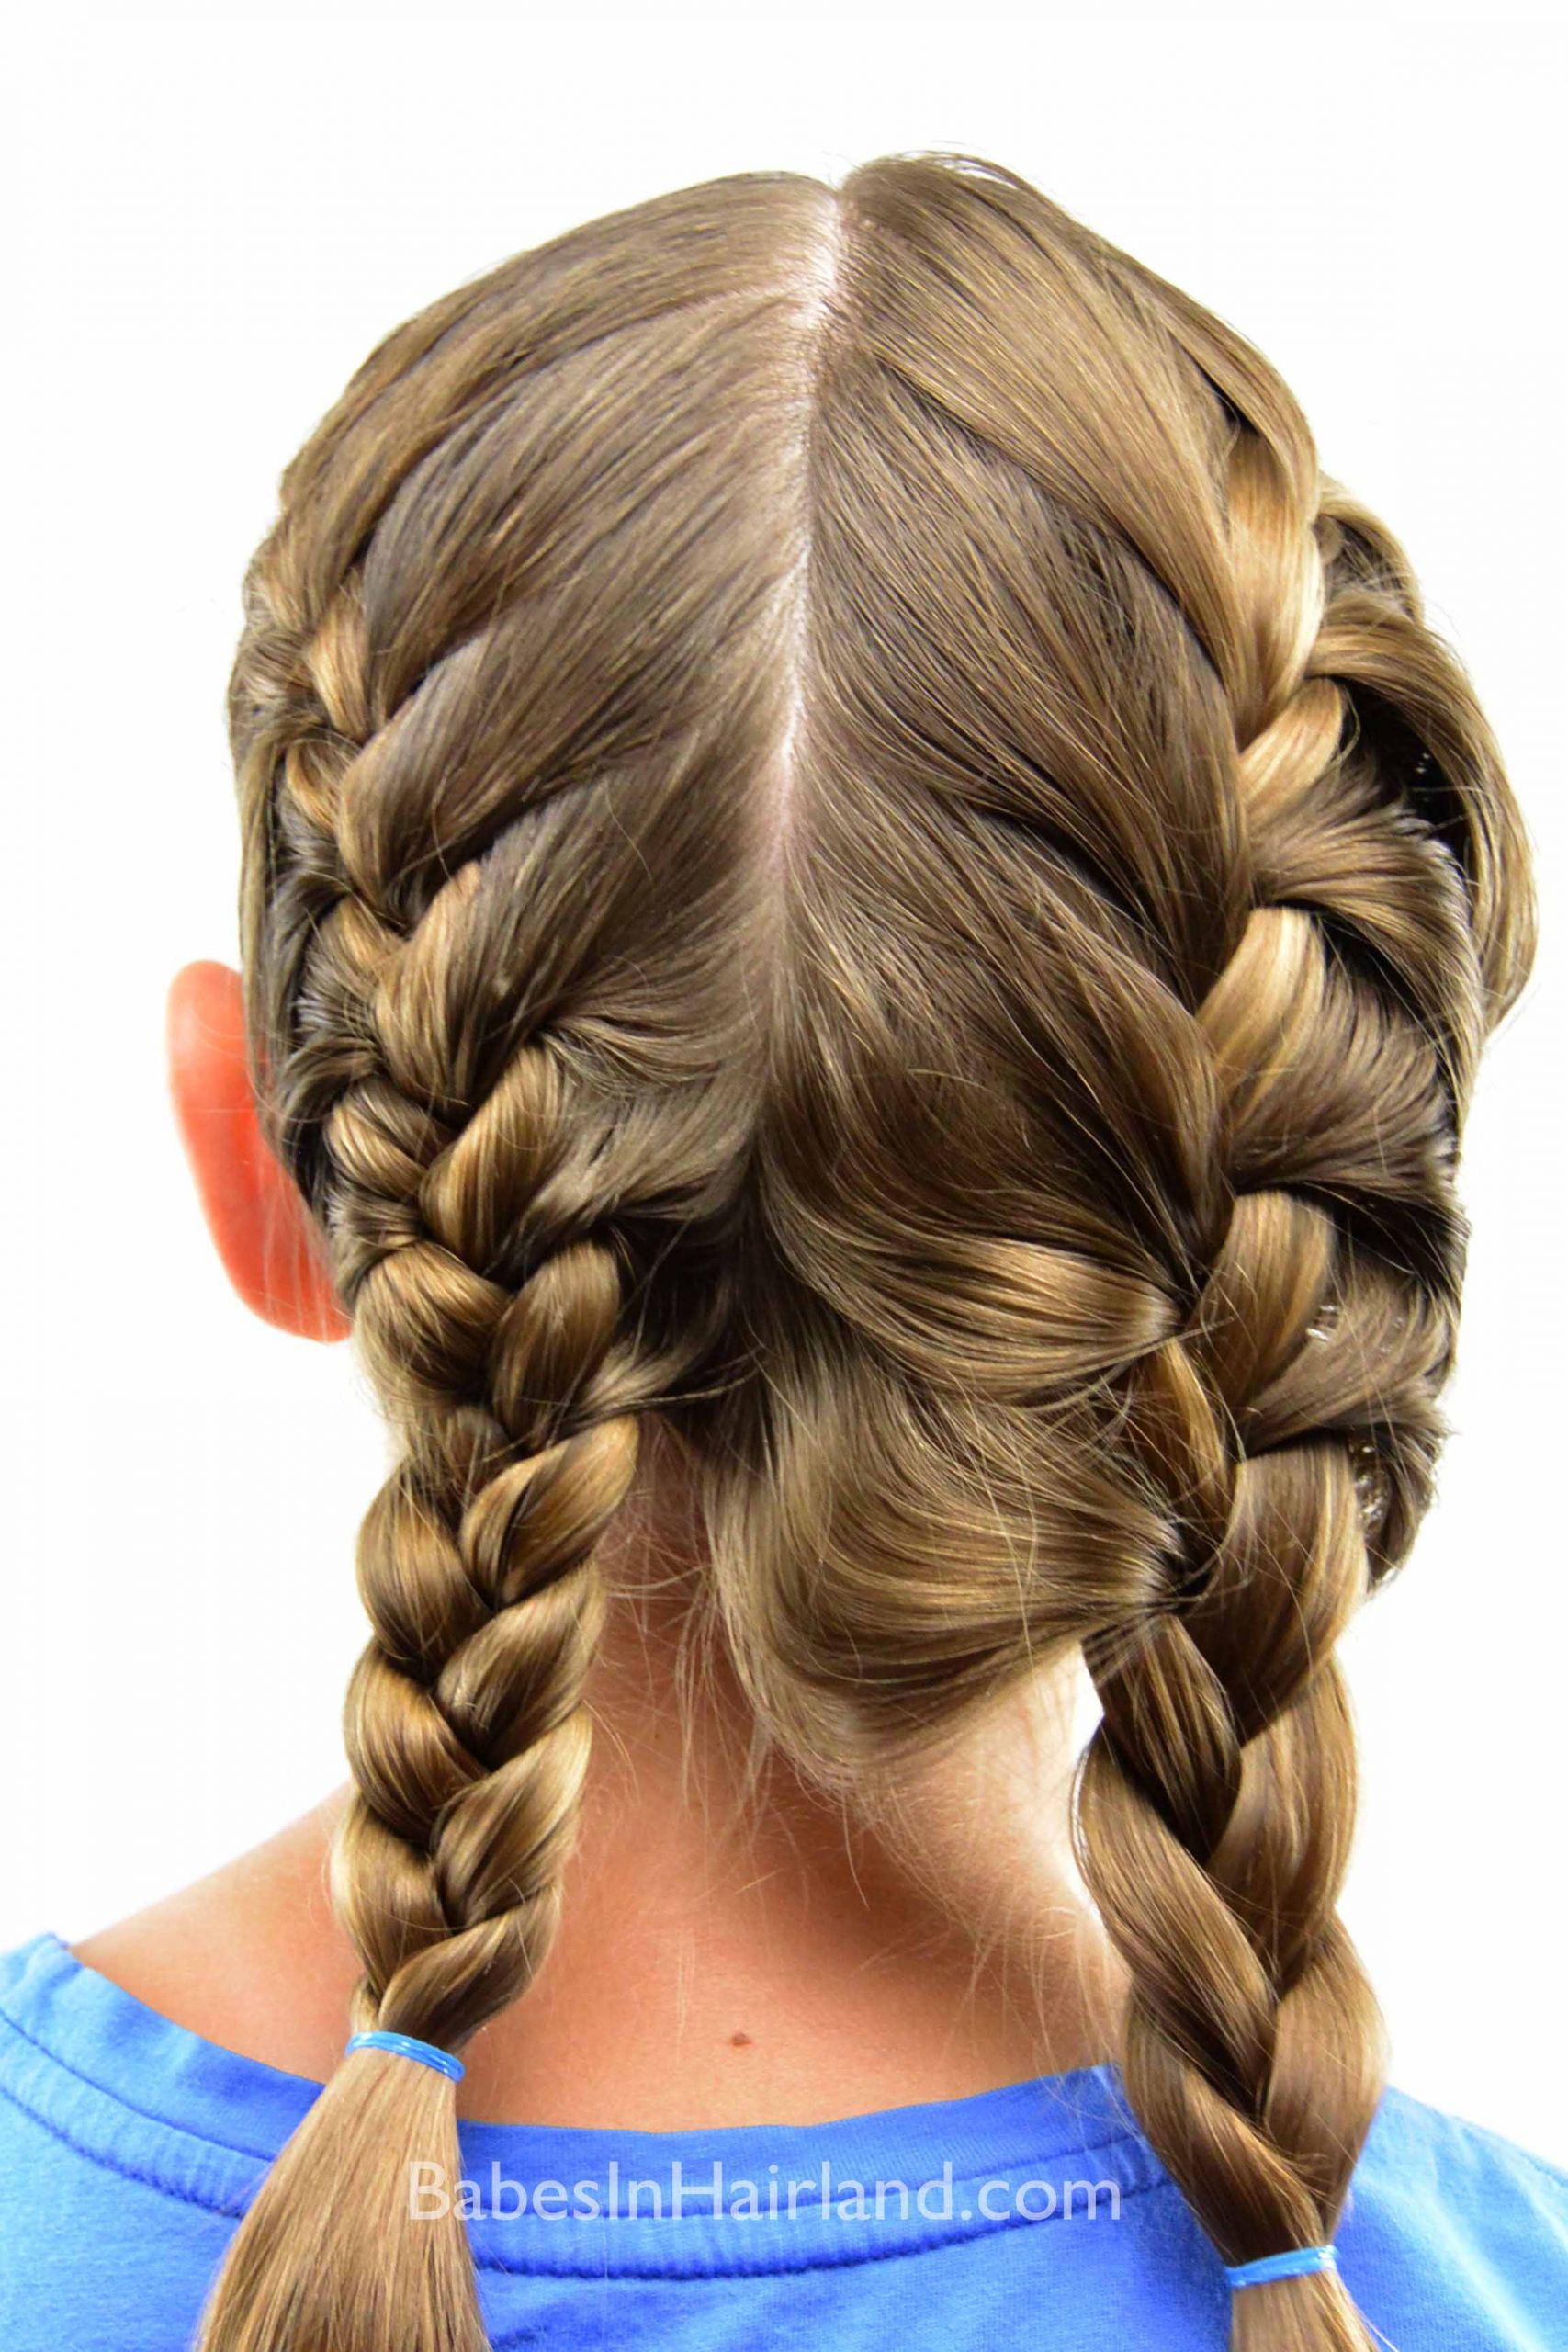 Braided Pigtail Hairstyles
 How to a Tight French Braid Babes In Hairland